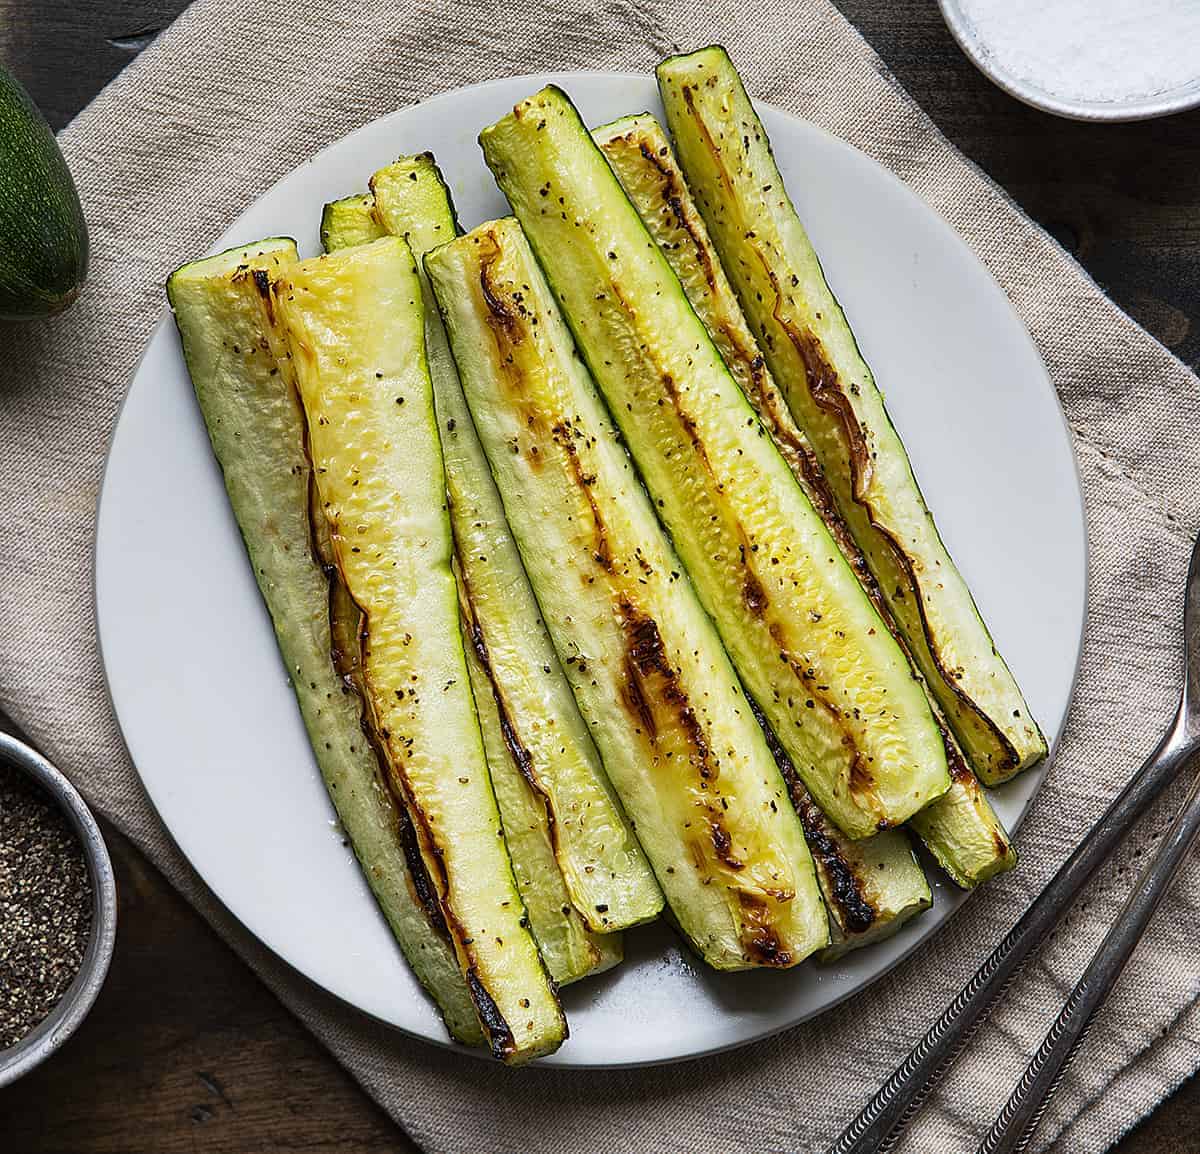 Overhead Image of Roasted Zucchini Spears on White Plate on Tan Napkin